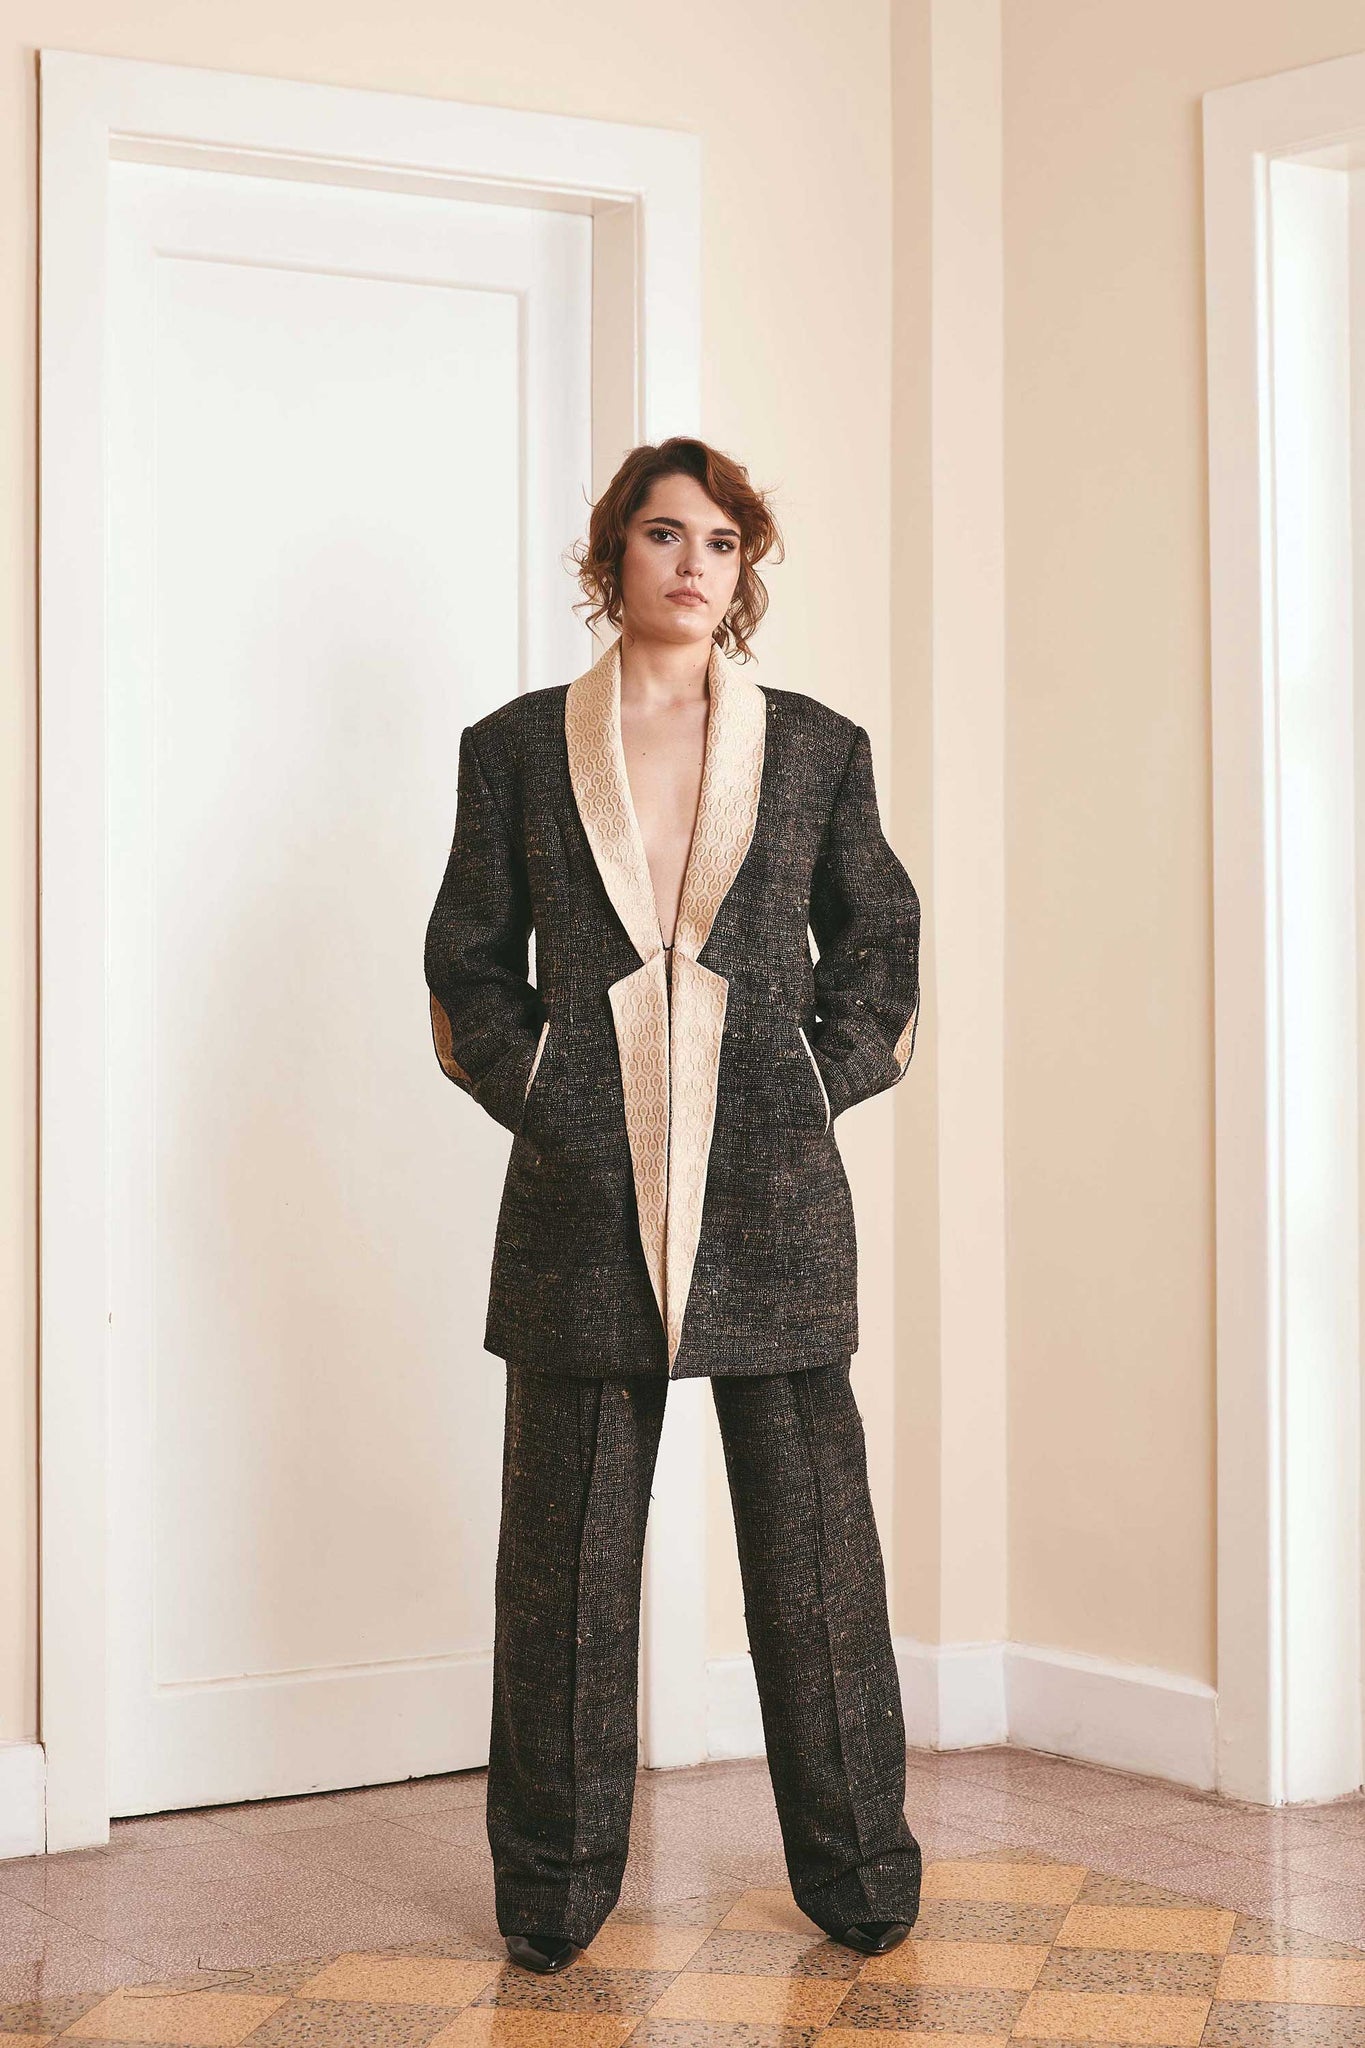 Couture Wedding Suit: Black and Gold Plain Woven Wool Silk Suit with Masculine Jacket - Handwoven in Bihar